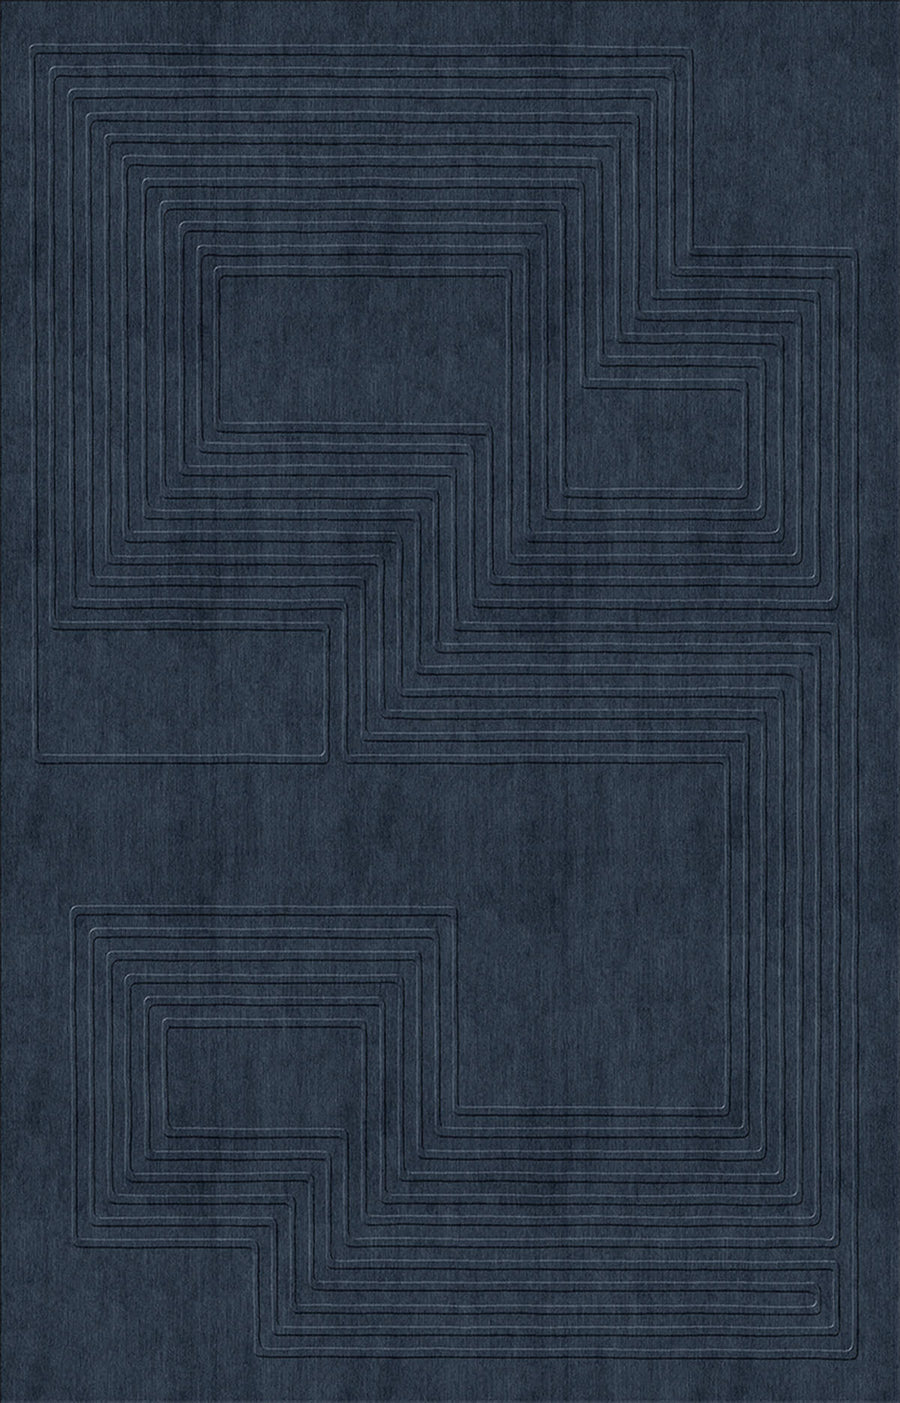 Luxury handcrafted relief rug by designer JT. Pfeiffer. Represented by design gallery Tuleste Factory in New York City.